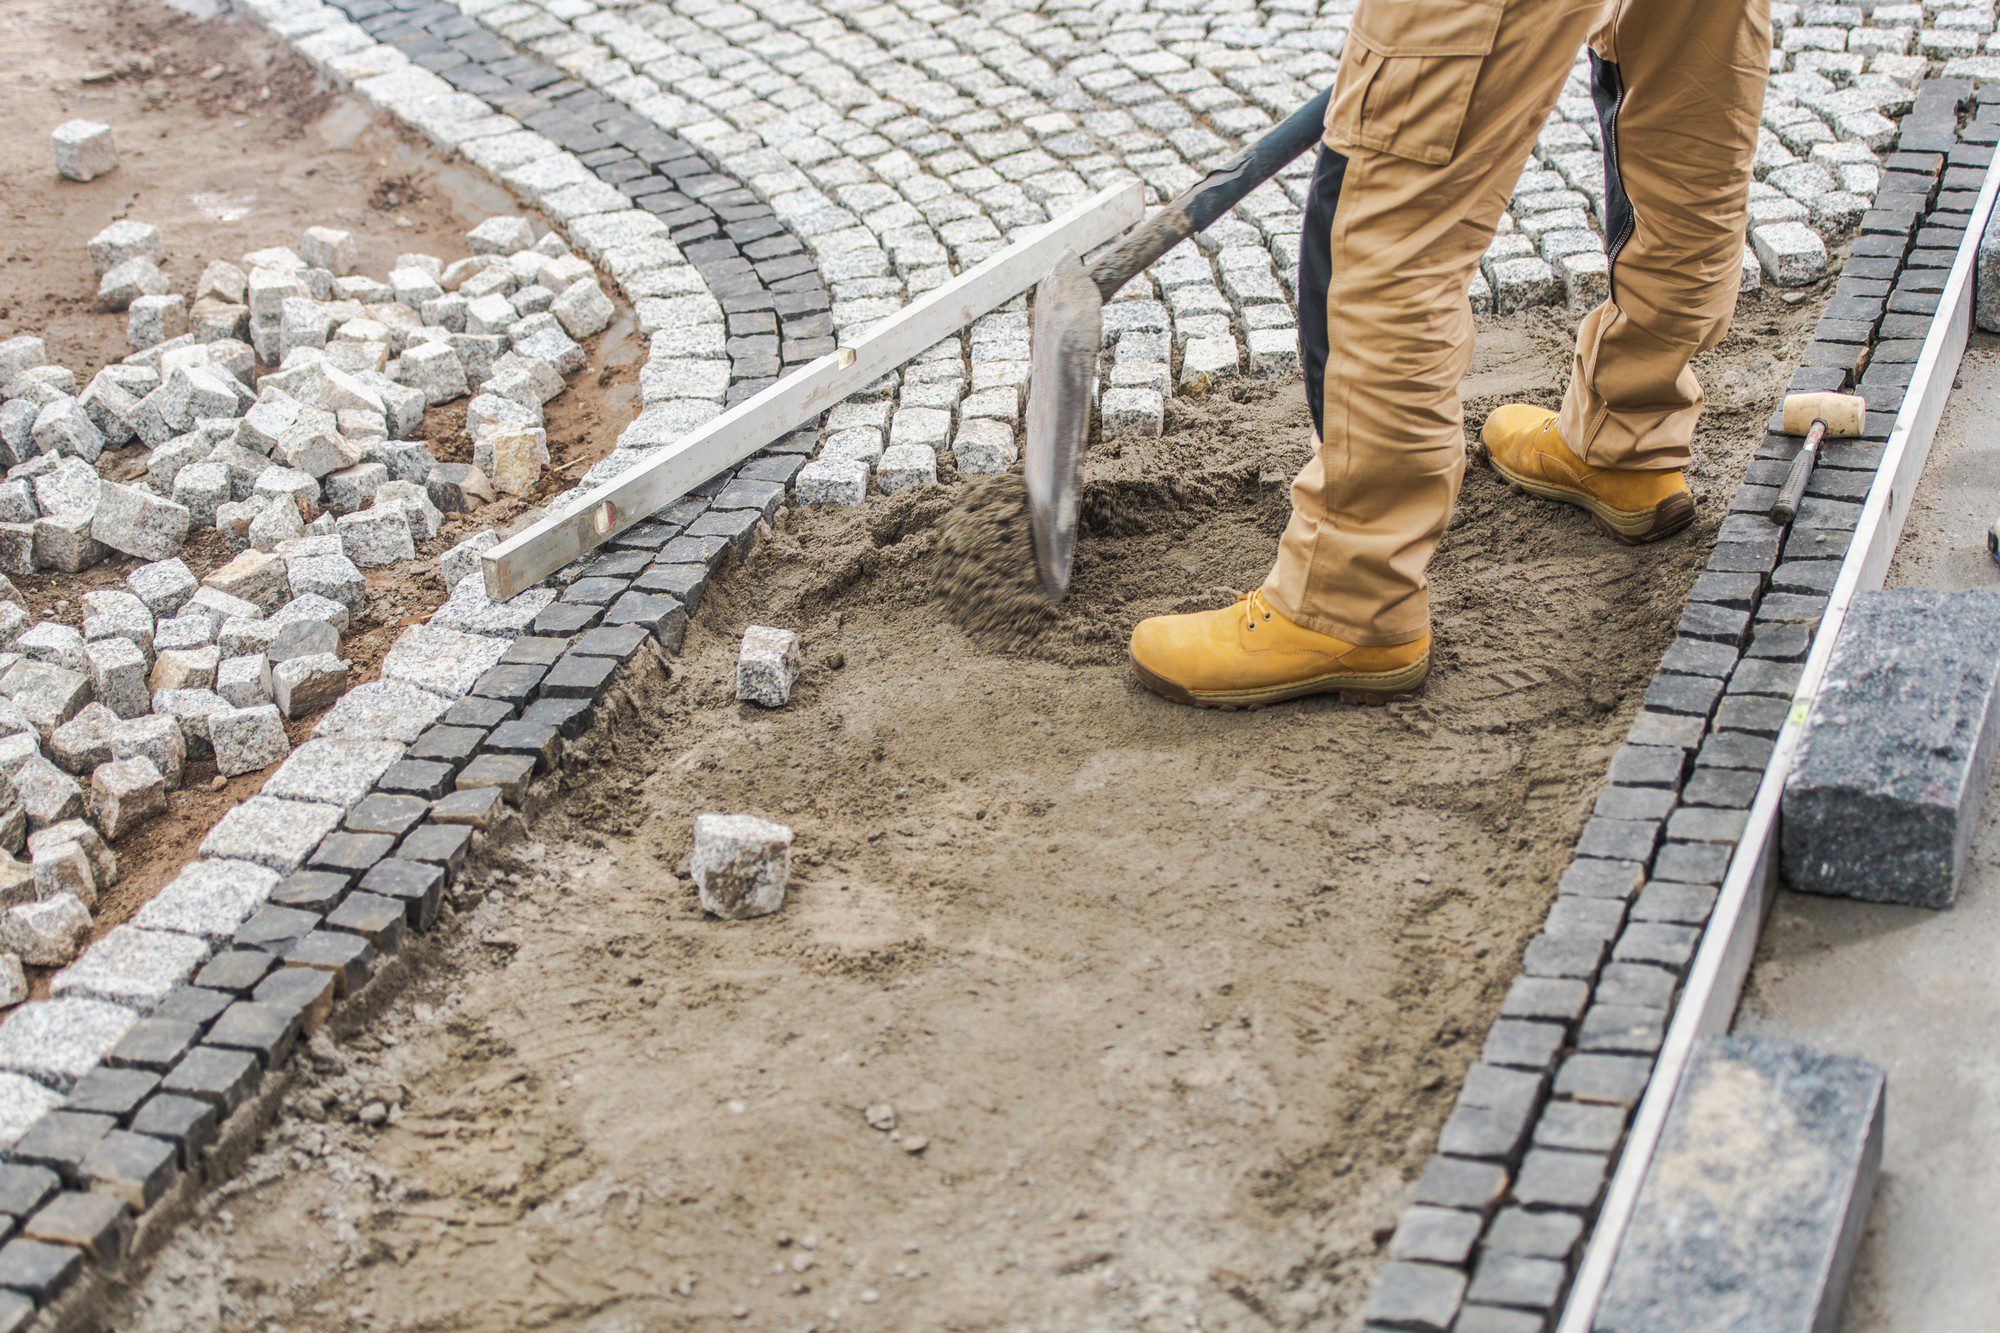 This image shows a person laying cobblestones to create a paved surface. You can see the individual wearing work boots and using tools such as a shovel to level the sand foundation where the stones will be placed. The person is working next to an area where the cobblestone paving is already partly completed, indicating that they are in the process of extending the pavement. The image also shows the use of a straight edge or leveling tool to ensure the surface is even and smooth. The cobblestones themselves are a mix of colours, suggesting a pattern or design might be implemented in the final paving work.